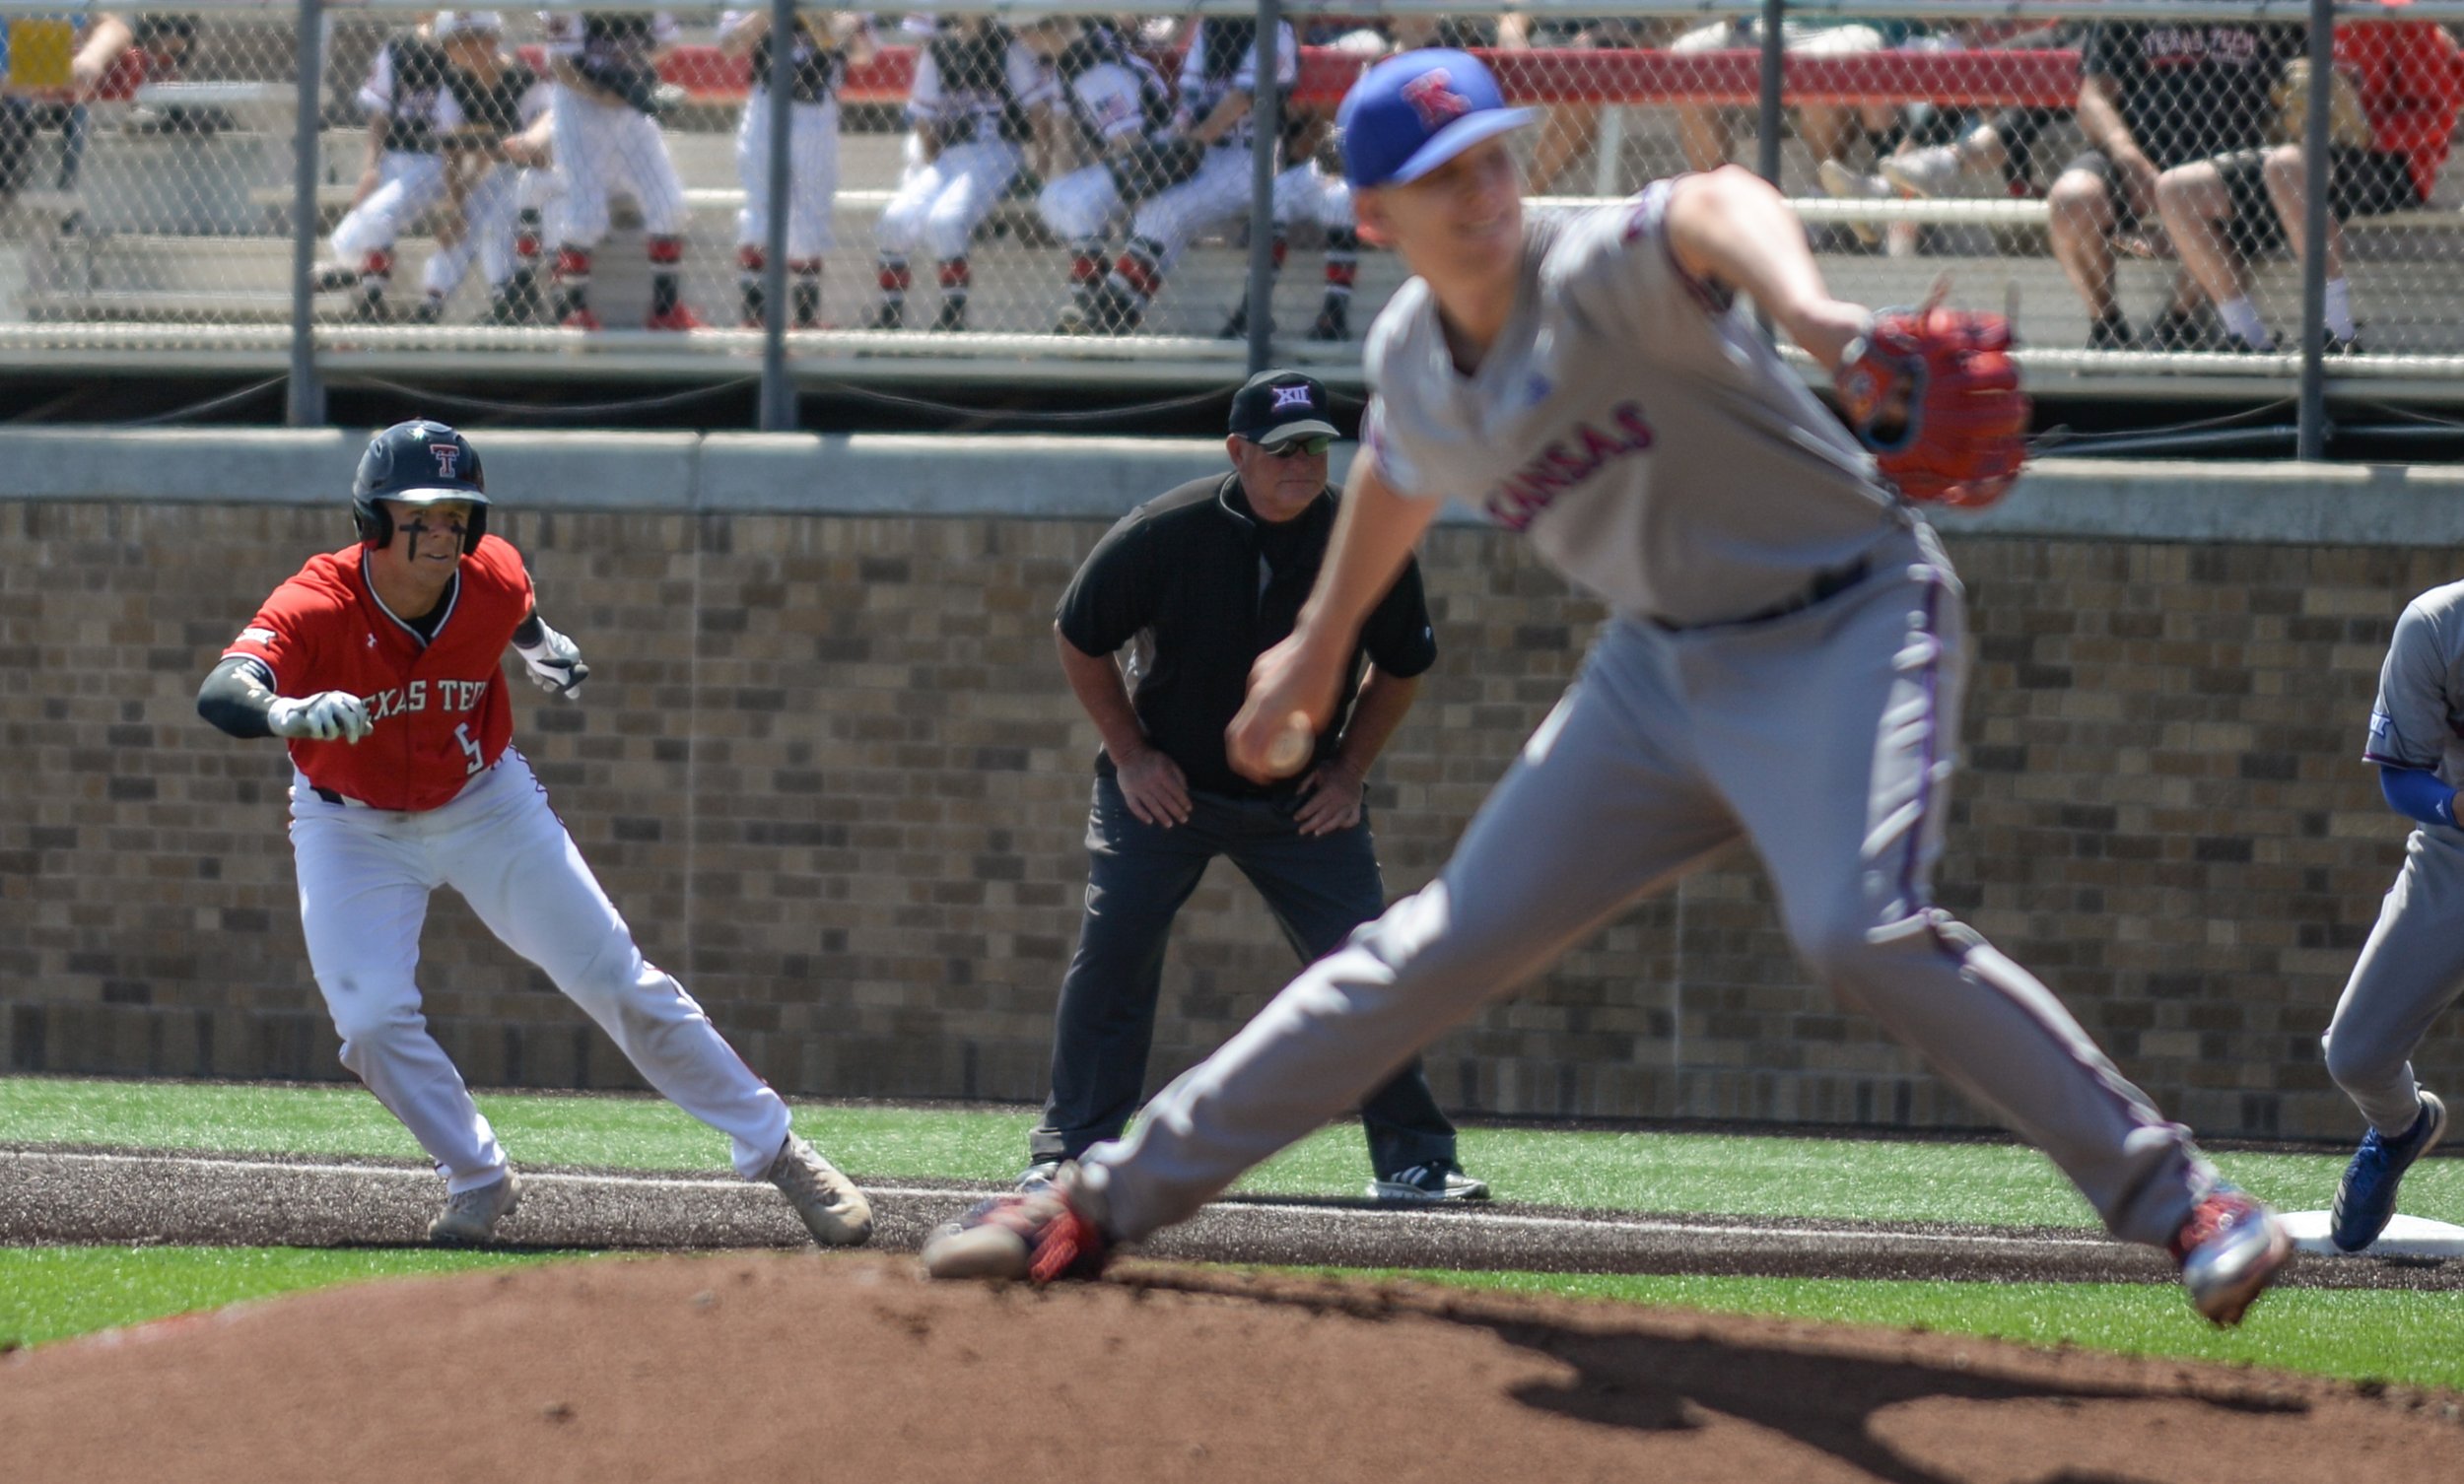  Texas Tech's Brian Klein (5) inches away from first base while Kansas pitches during the second of a three game series Saturday, April 6, 2019 at Dan Law Field in Lubbock, Texas. [Abbie Burnett/A-J Media] 